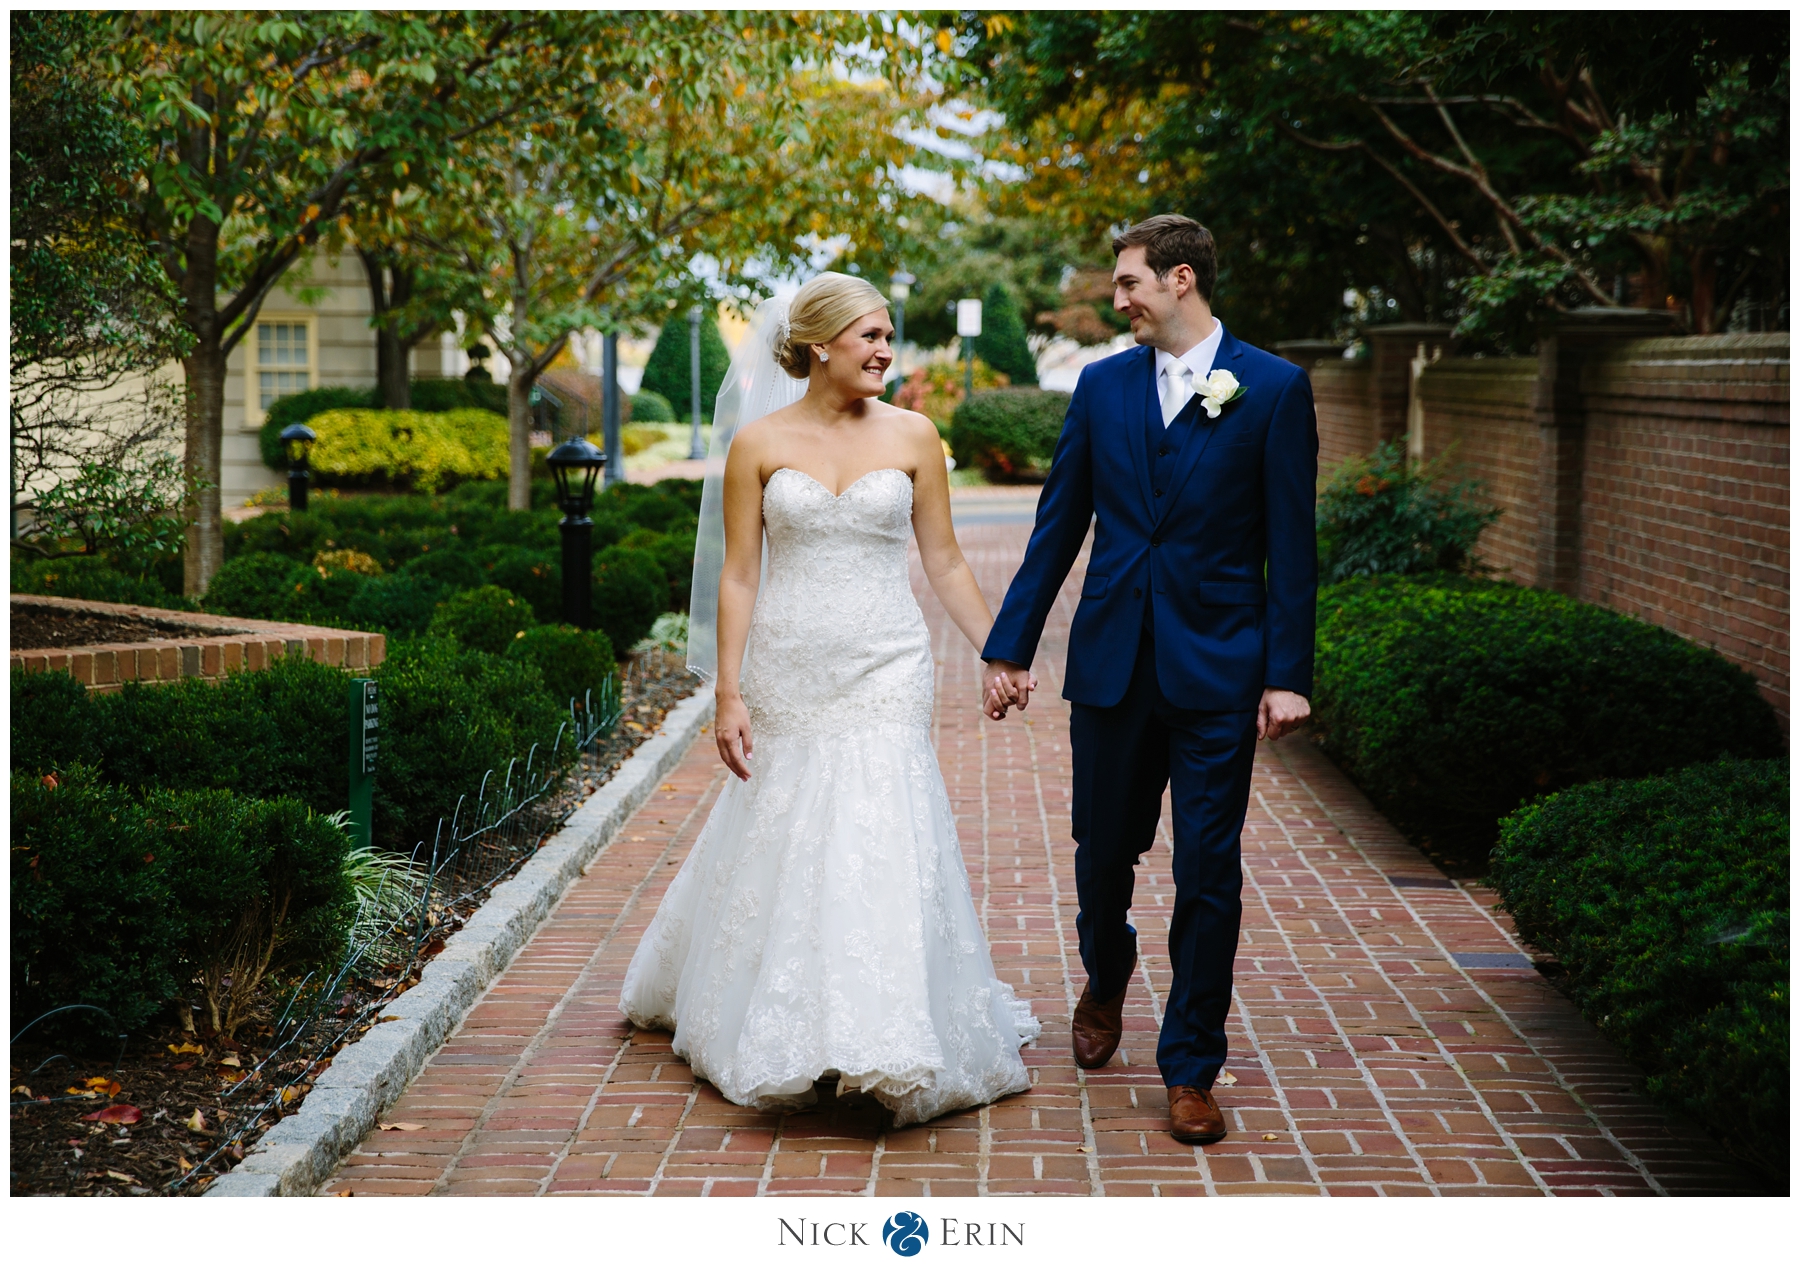 Donner_Photography_Torpedo Factory Wedding_Courtney and Scott_0010